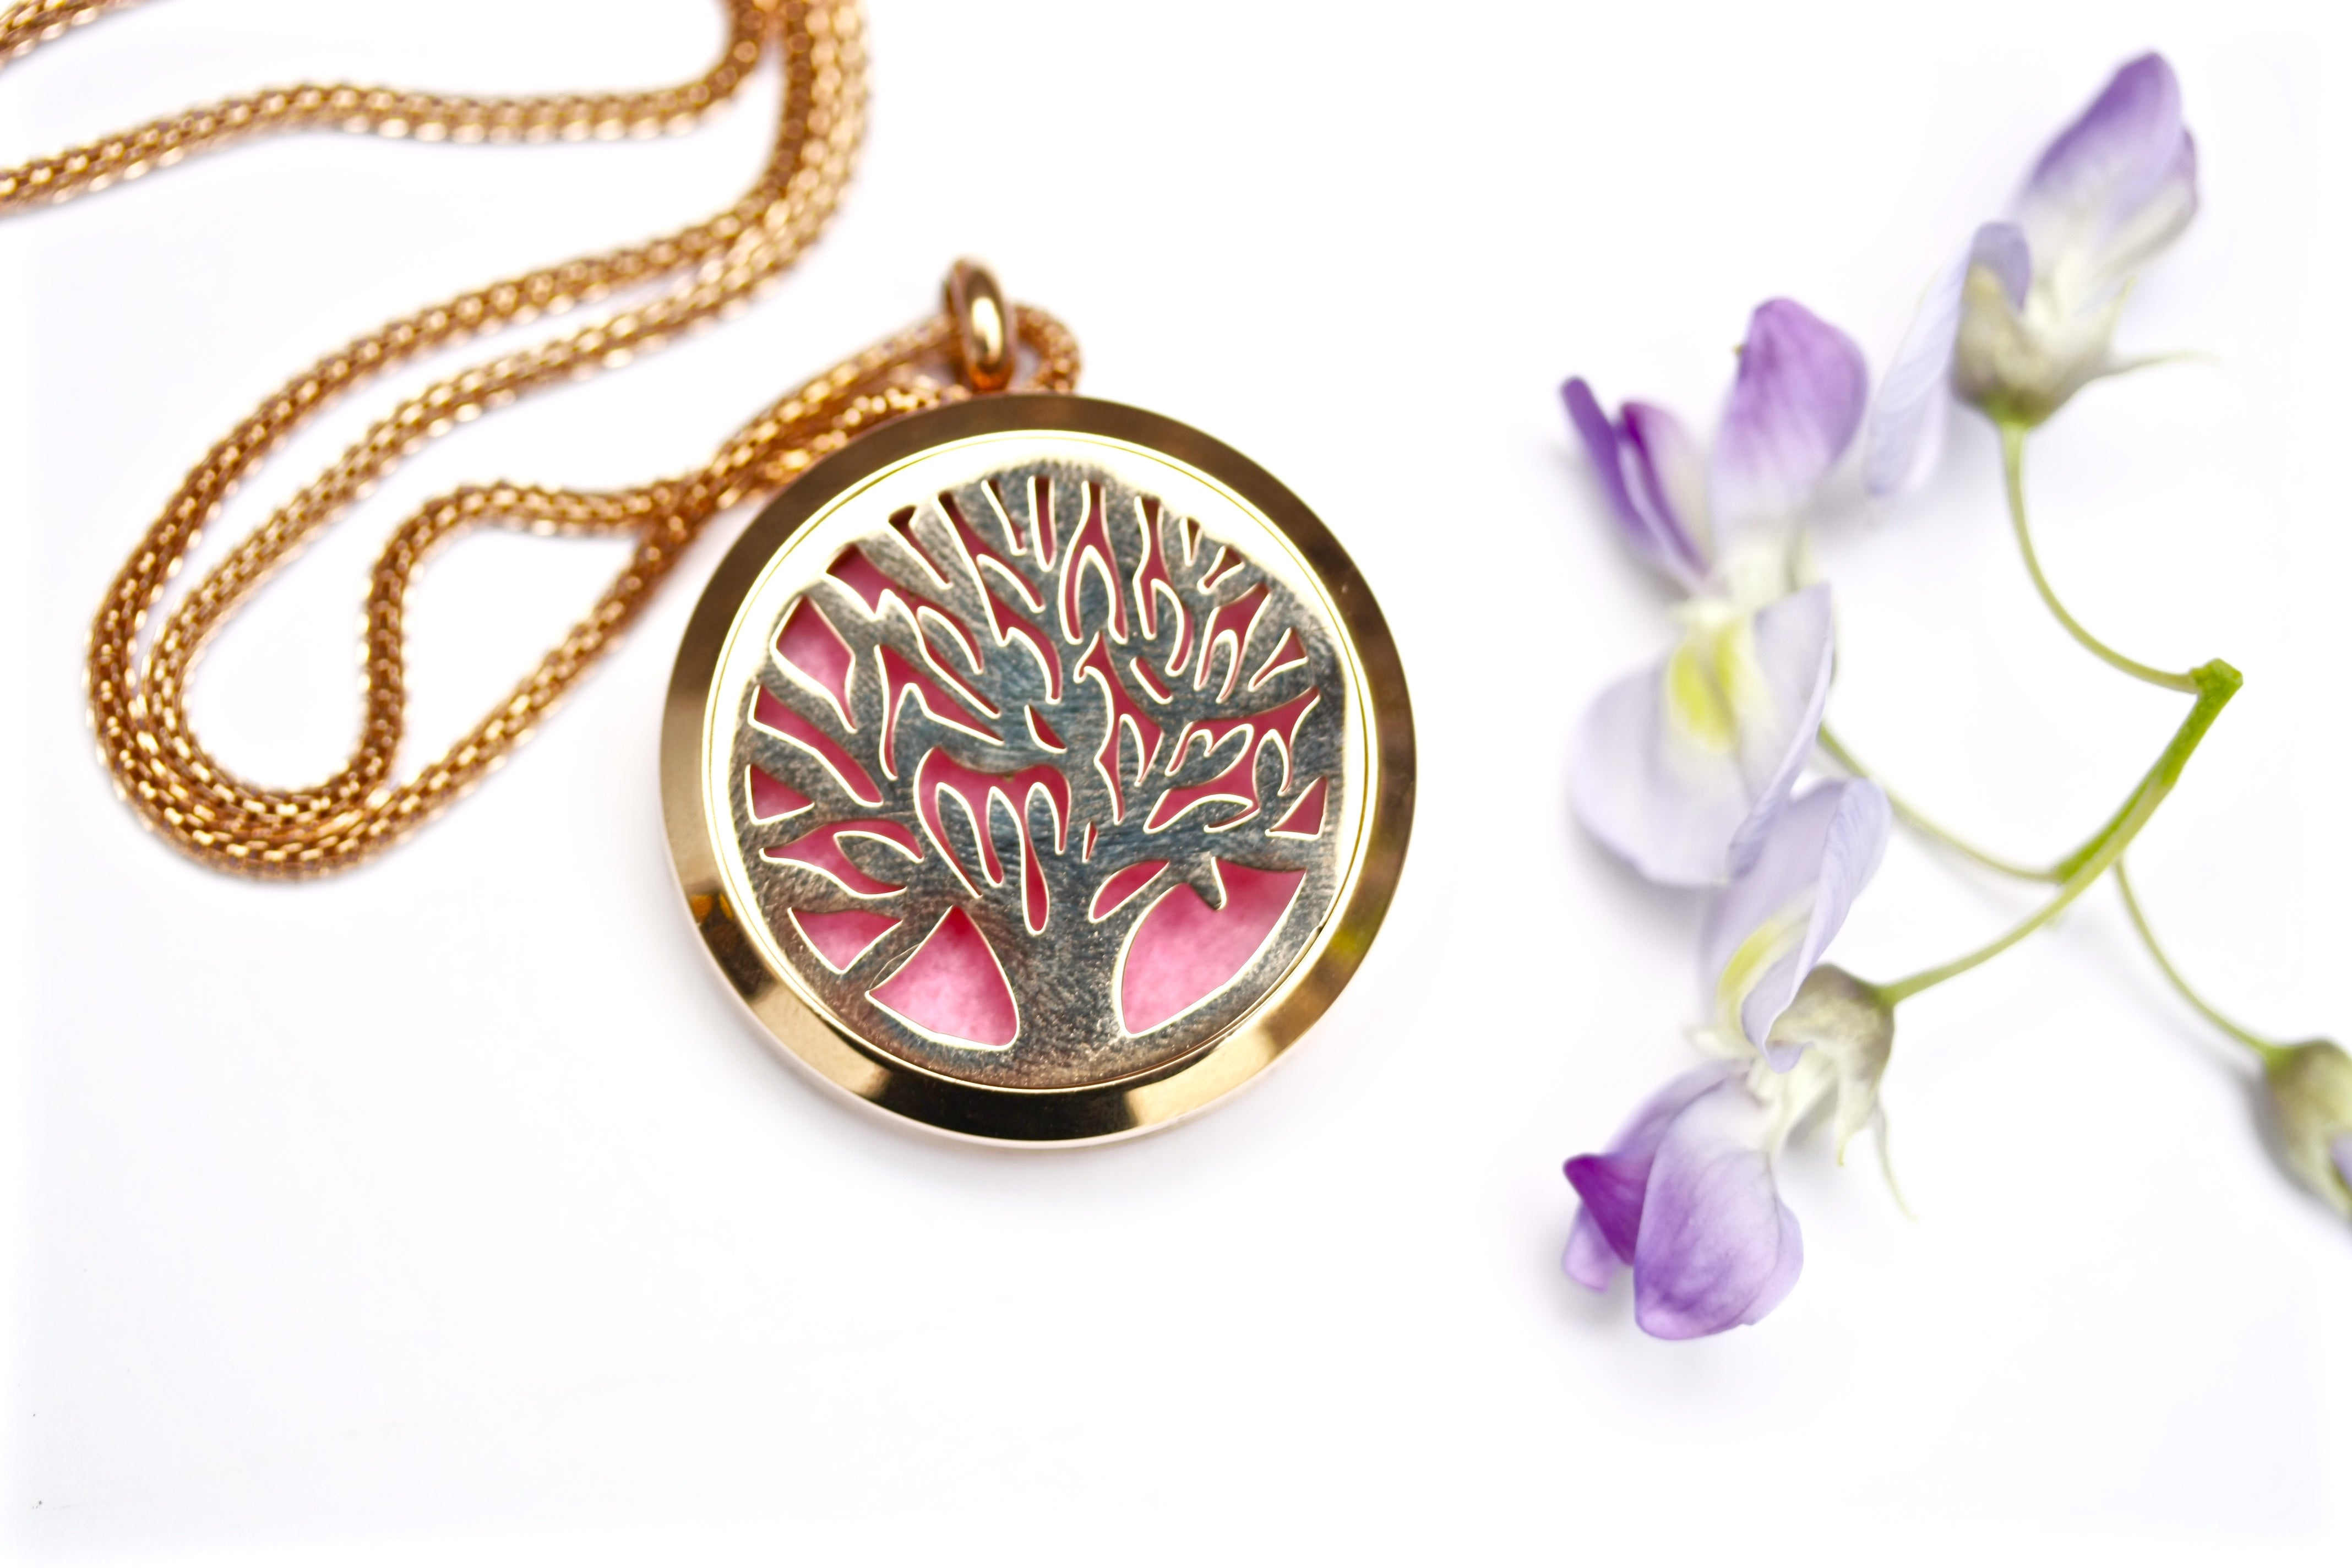 Loom Tree Aromatherapy Essential Oil Diffuser Pendant Necklace Flying Girl  | Fashion Jewelry | Necklaces Pendants : Amazon.in: Health & Personal Care